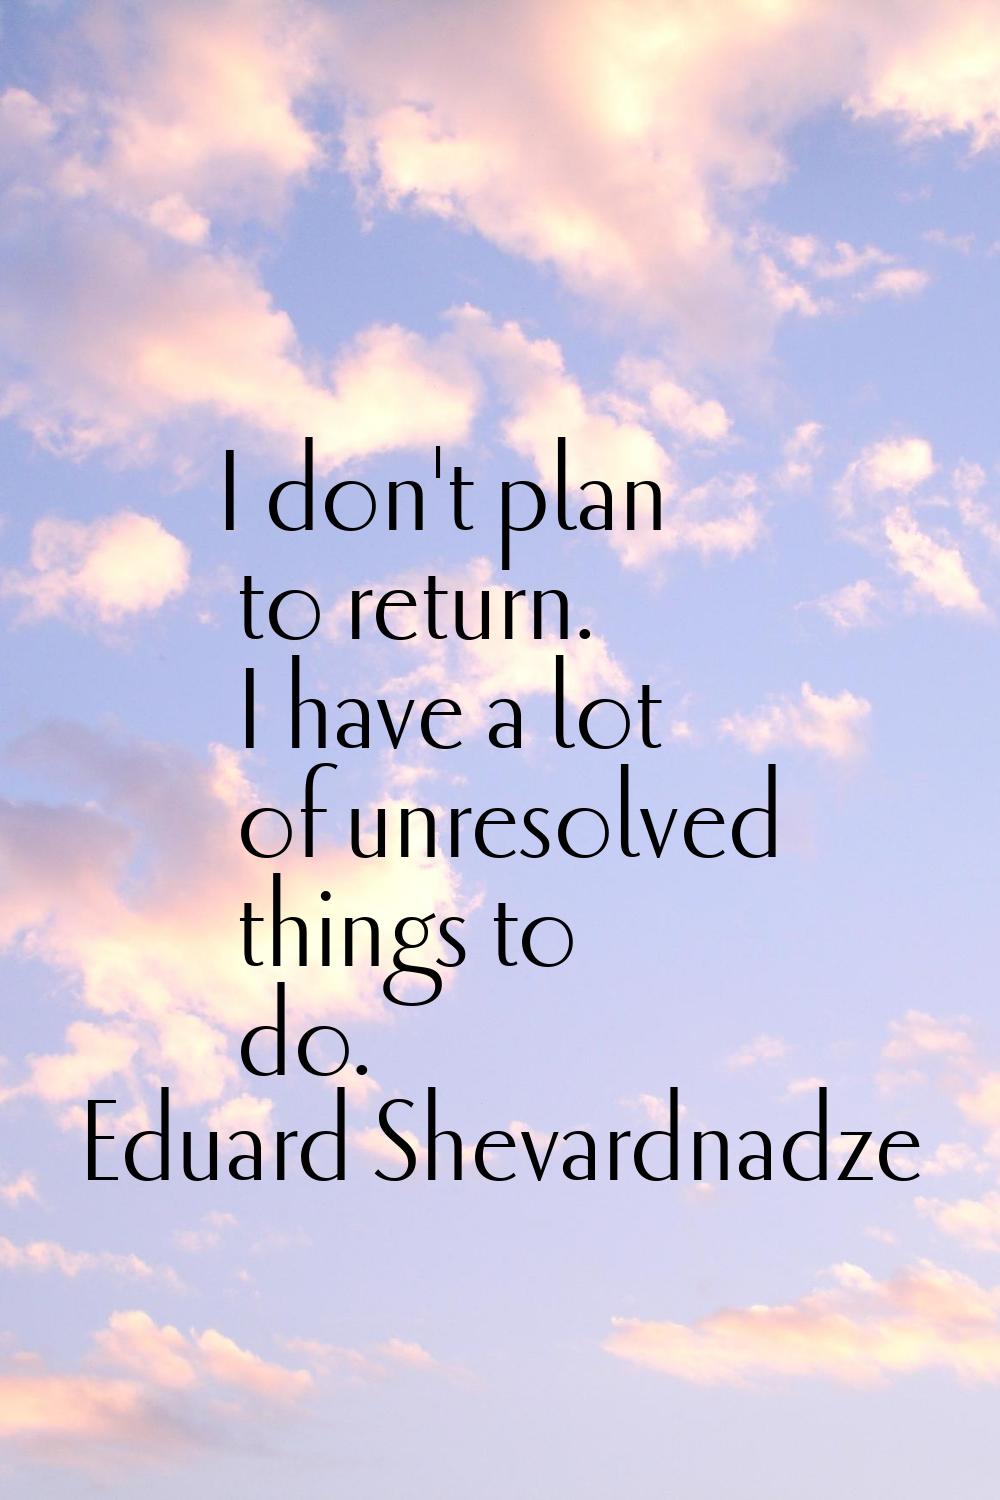 I don't plan to return. I have a lot of unresolved things to do.